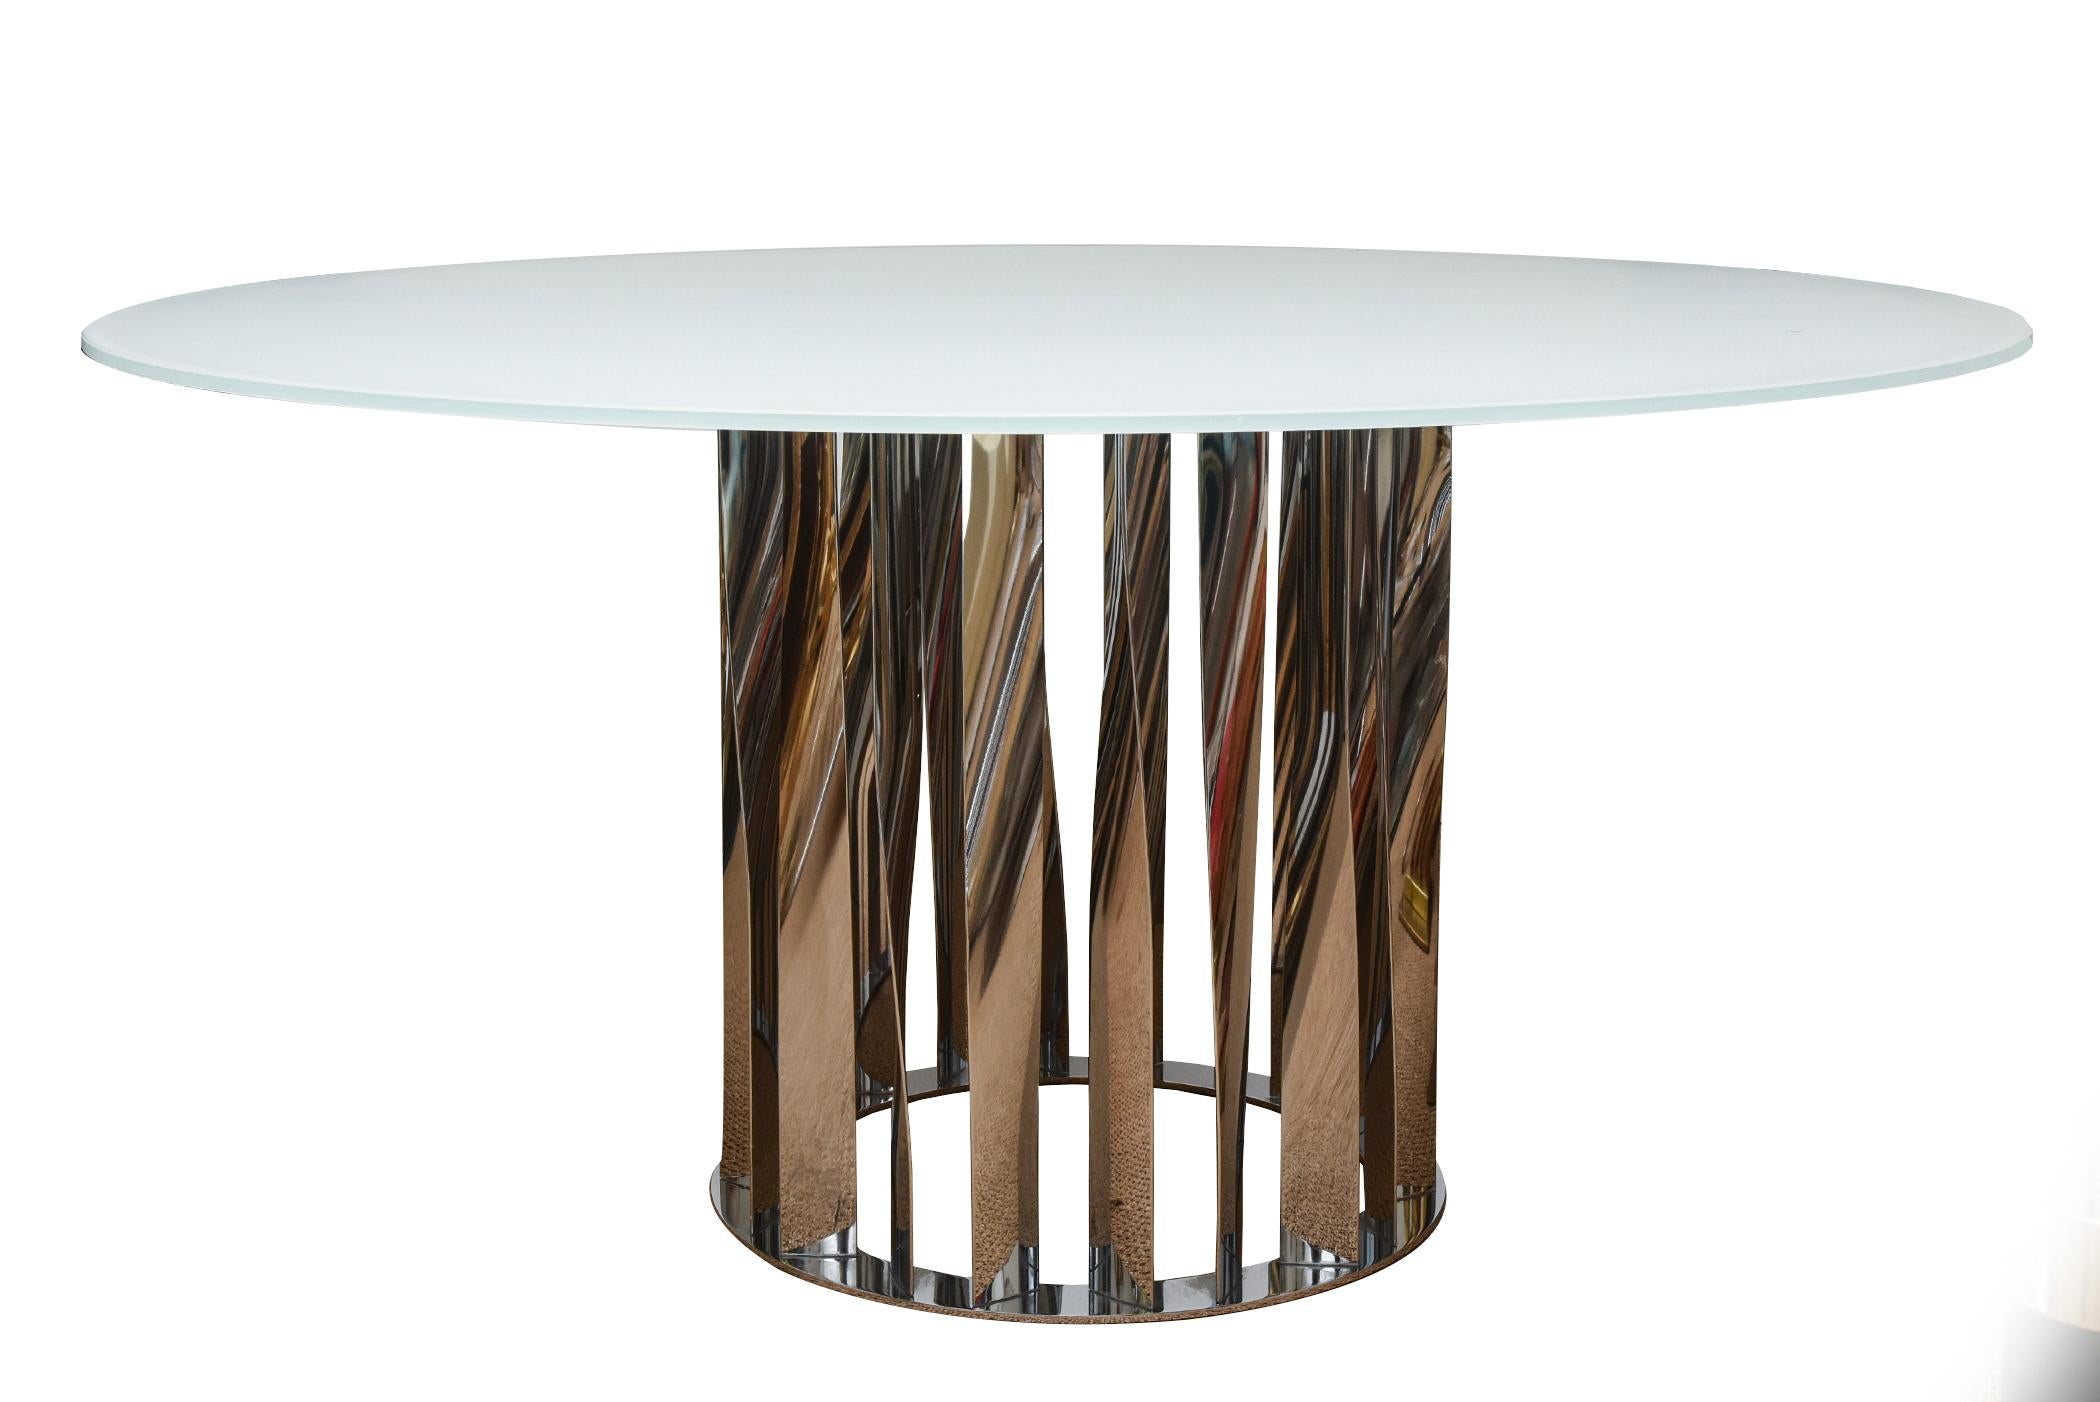 This Italian modern and contemporary round dining table or desk or entry table designed by Rodolfo Dordoni for Cassina is from about 2012. The original glass top is white milk glass and the base is rhythmic patterns of chromed mylar that look like